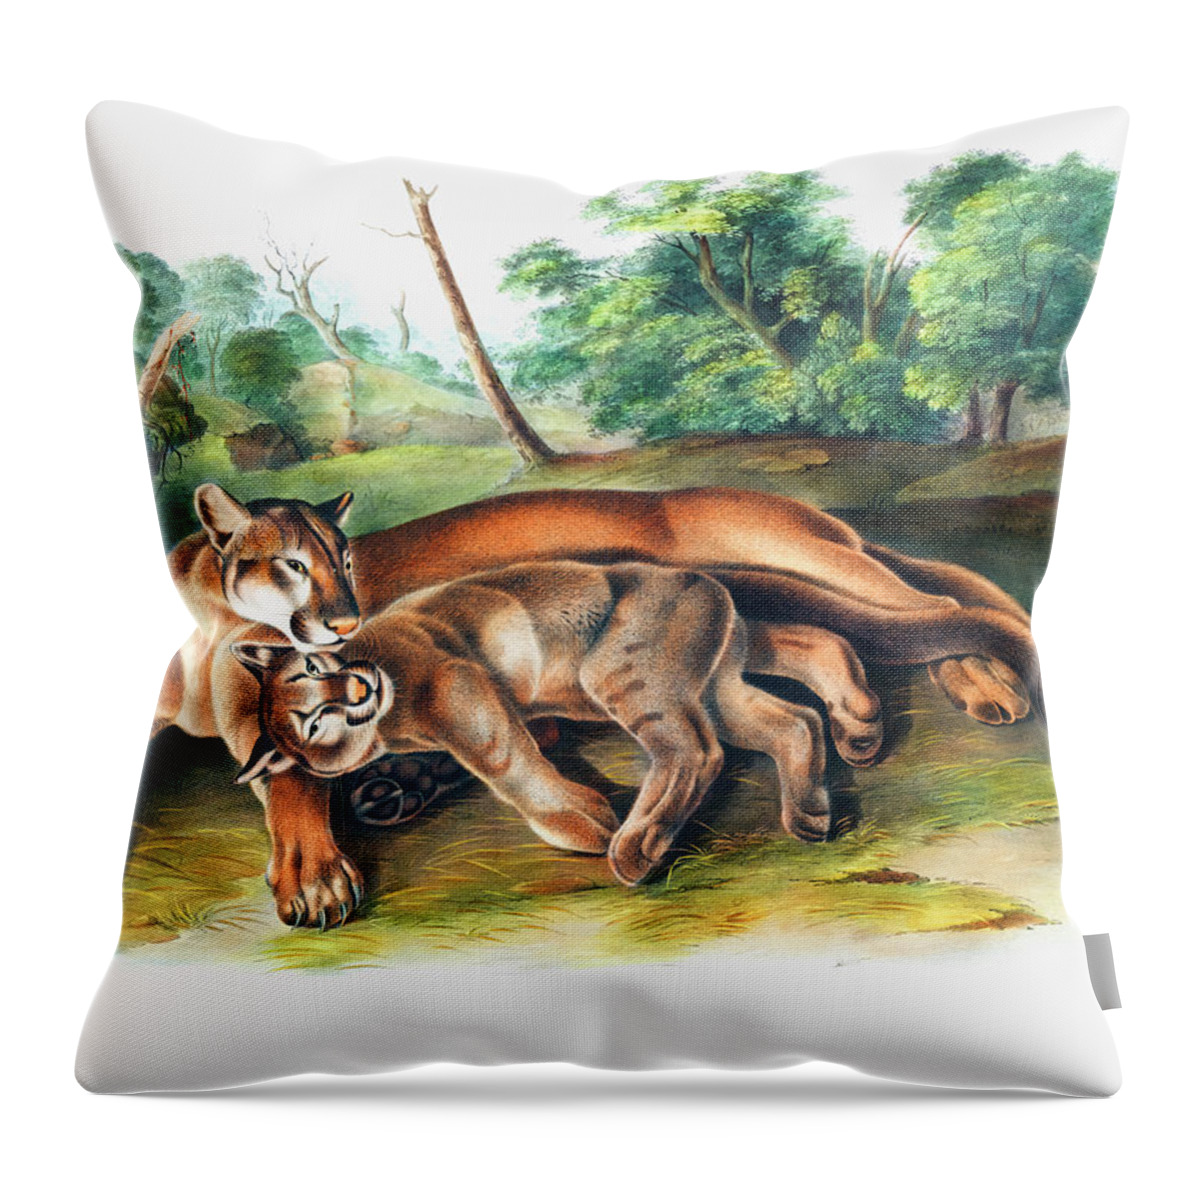 Cougar Throw Pillow featuring the drawing Cougar by John Woodhouse Audubon